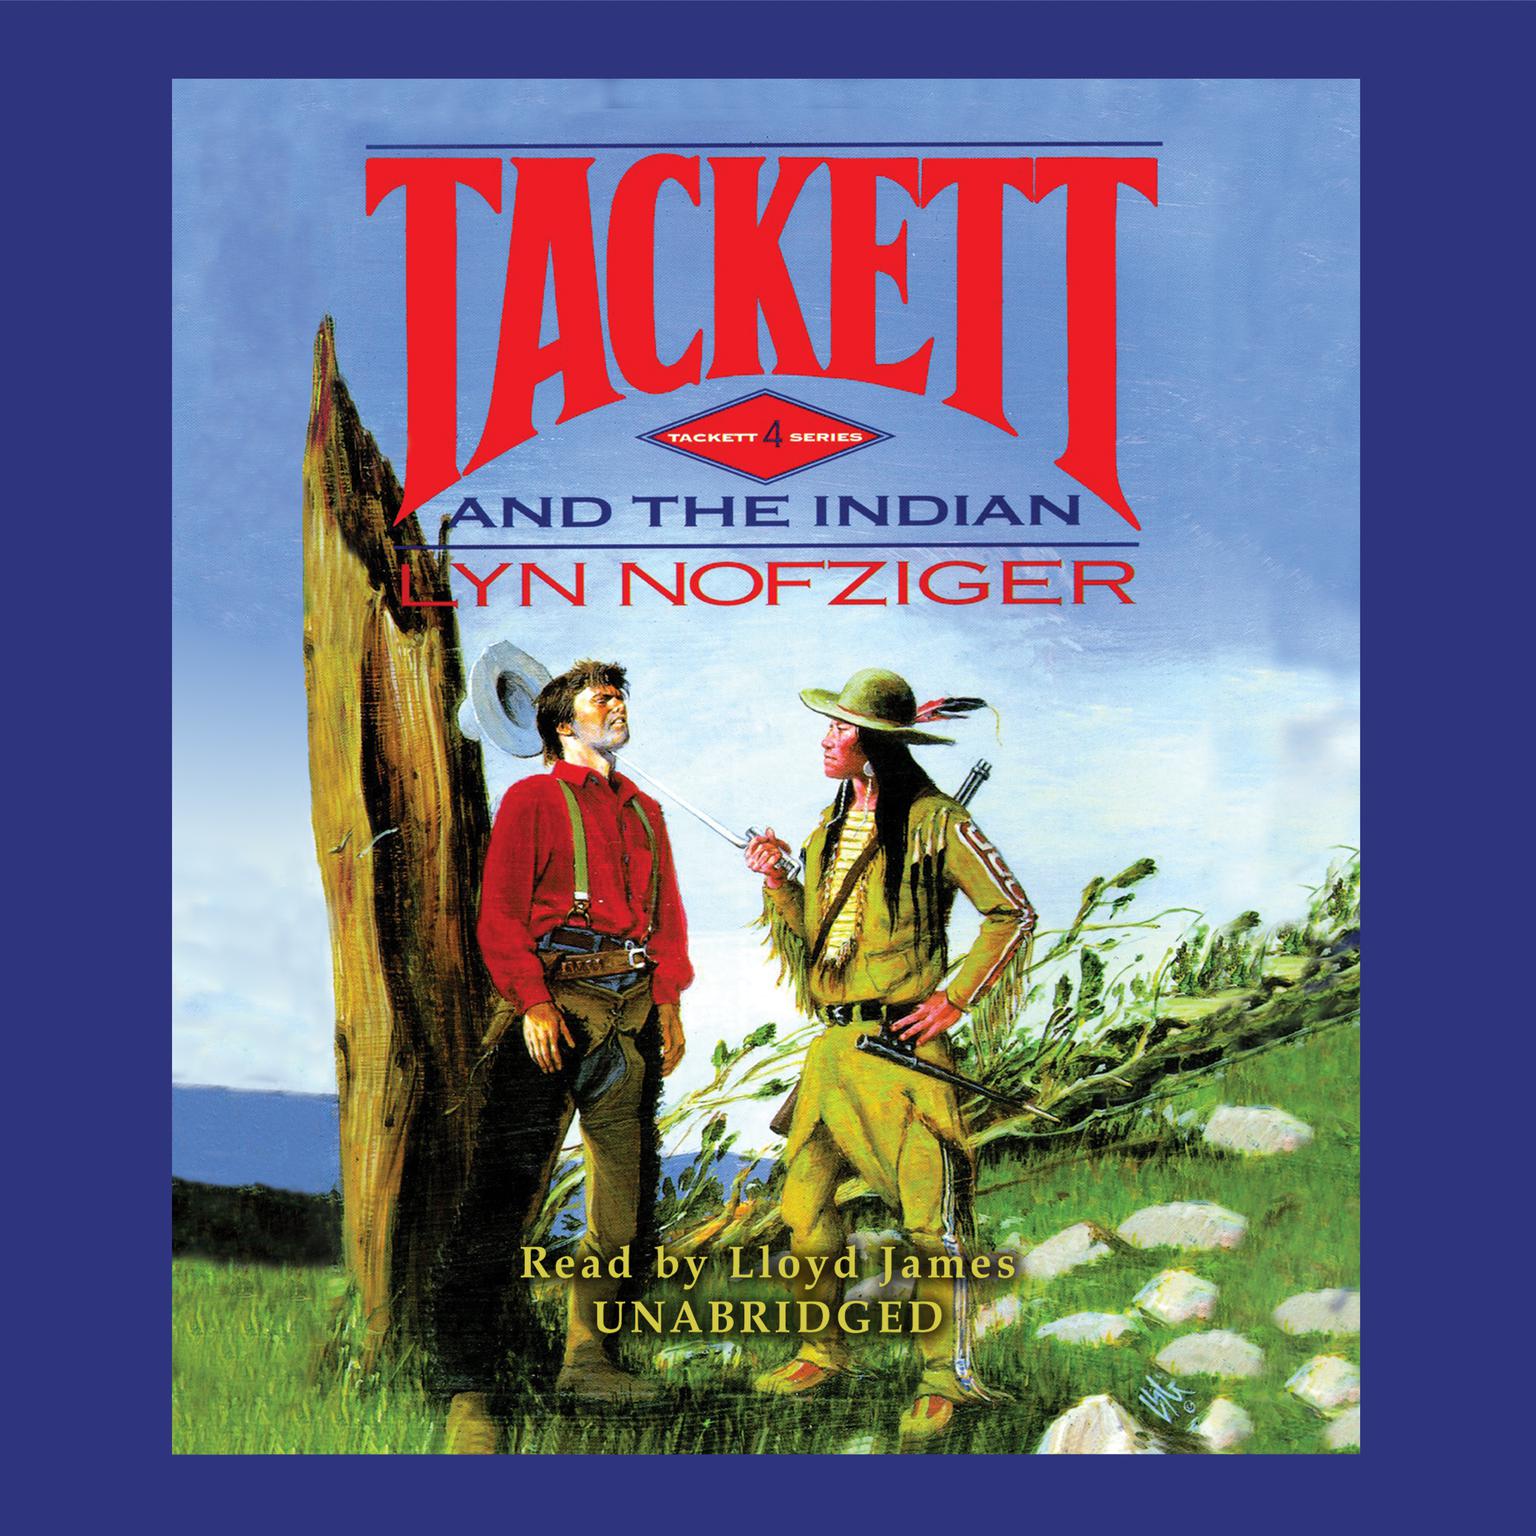 Tackett and the Indian Audiobook, by Lyn Nofziger